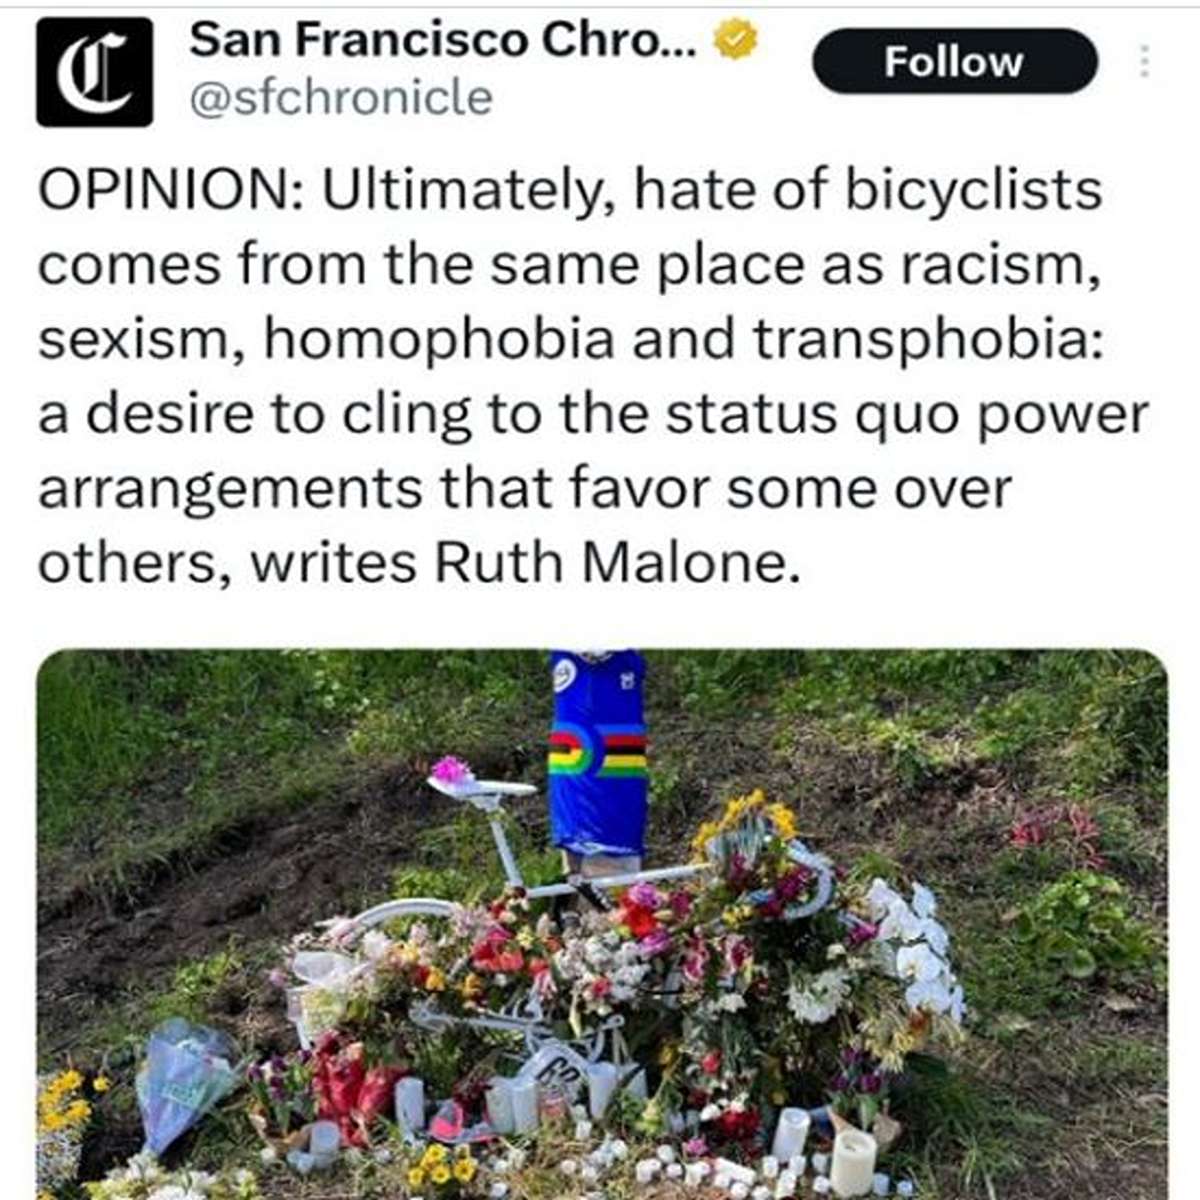 delusional people - flora - San Francisco Chro... Opinion Ultimately, hate of bicyclists comes from the same place as racism, sexism, homophobia and transphobia a desire to cling to the status quo power arrangements that favor some over others, writes Rut